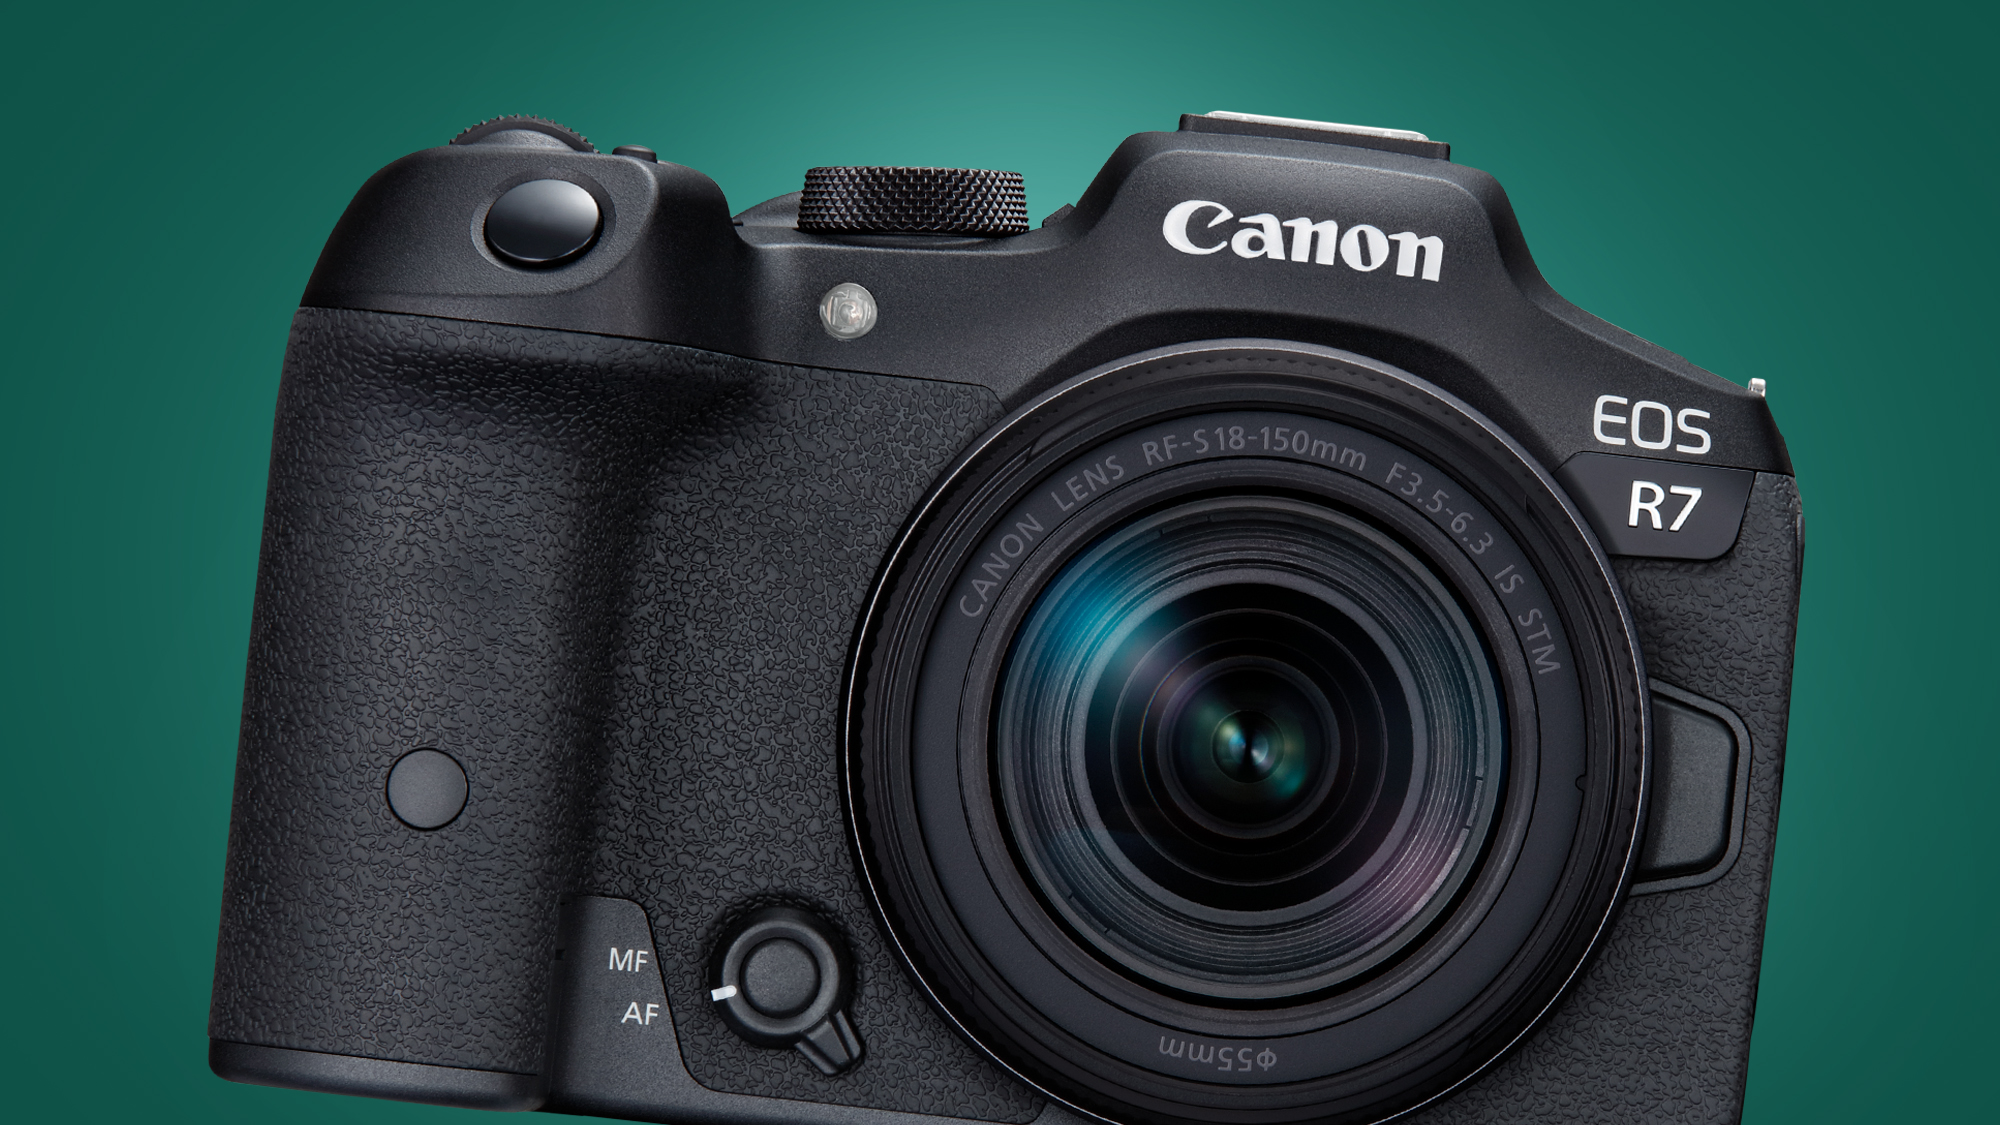 The Canon EOS R7 camera on a green background